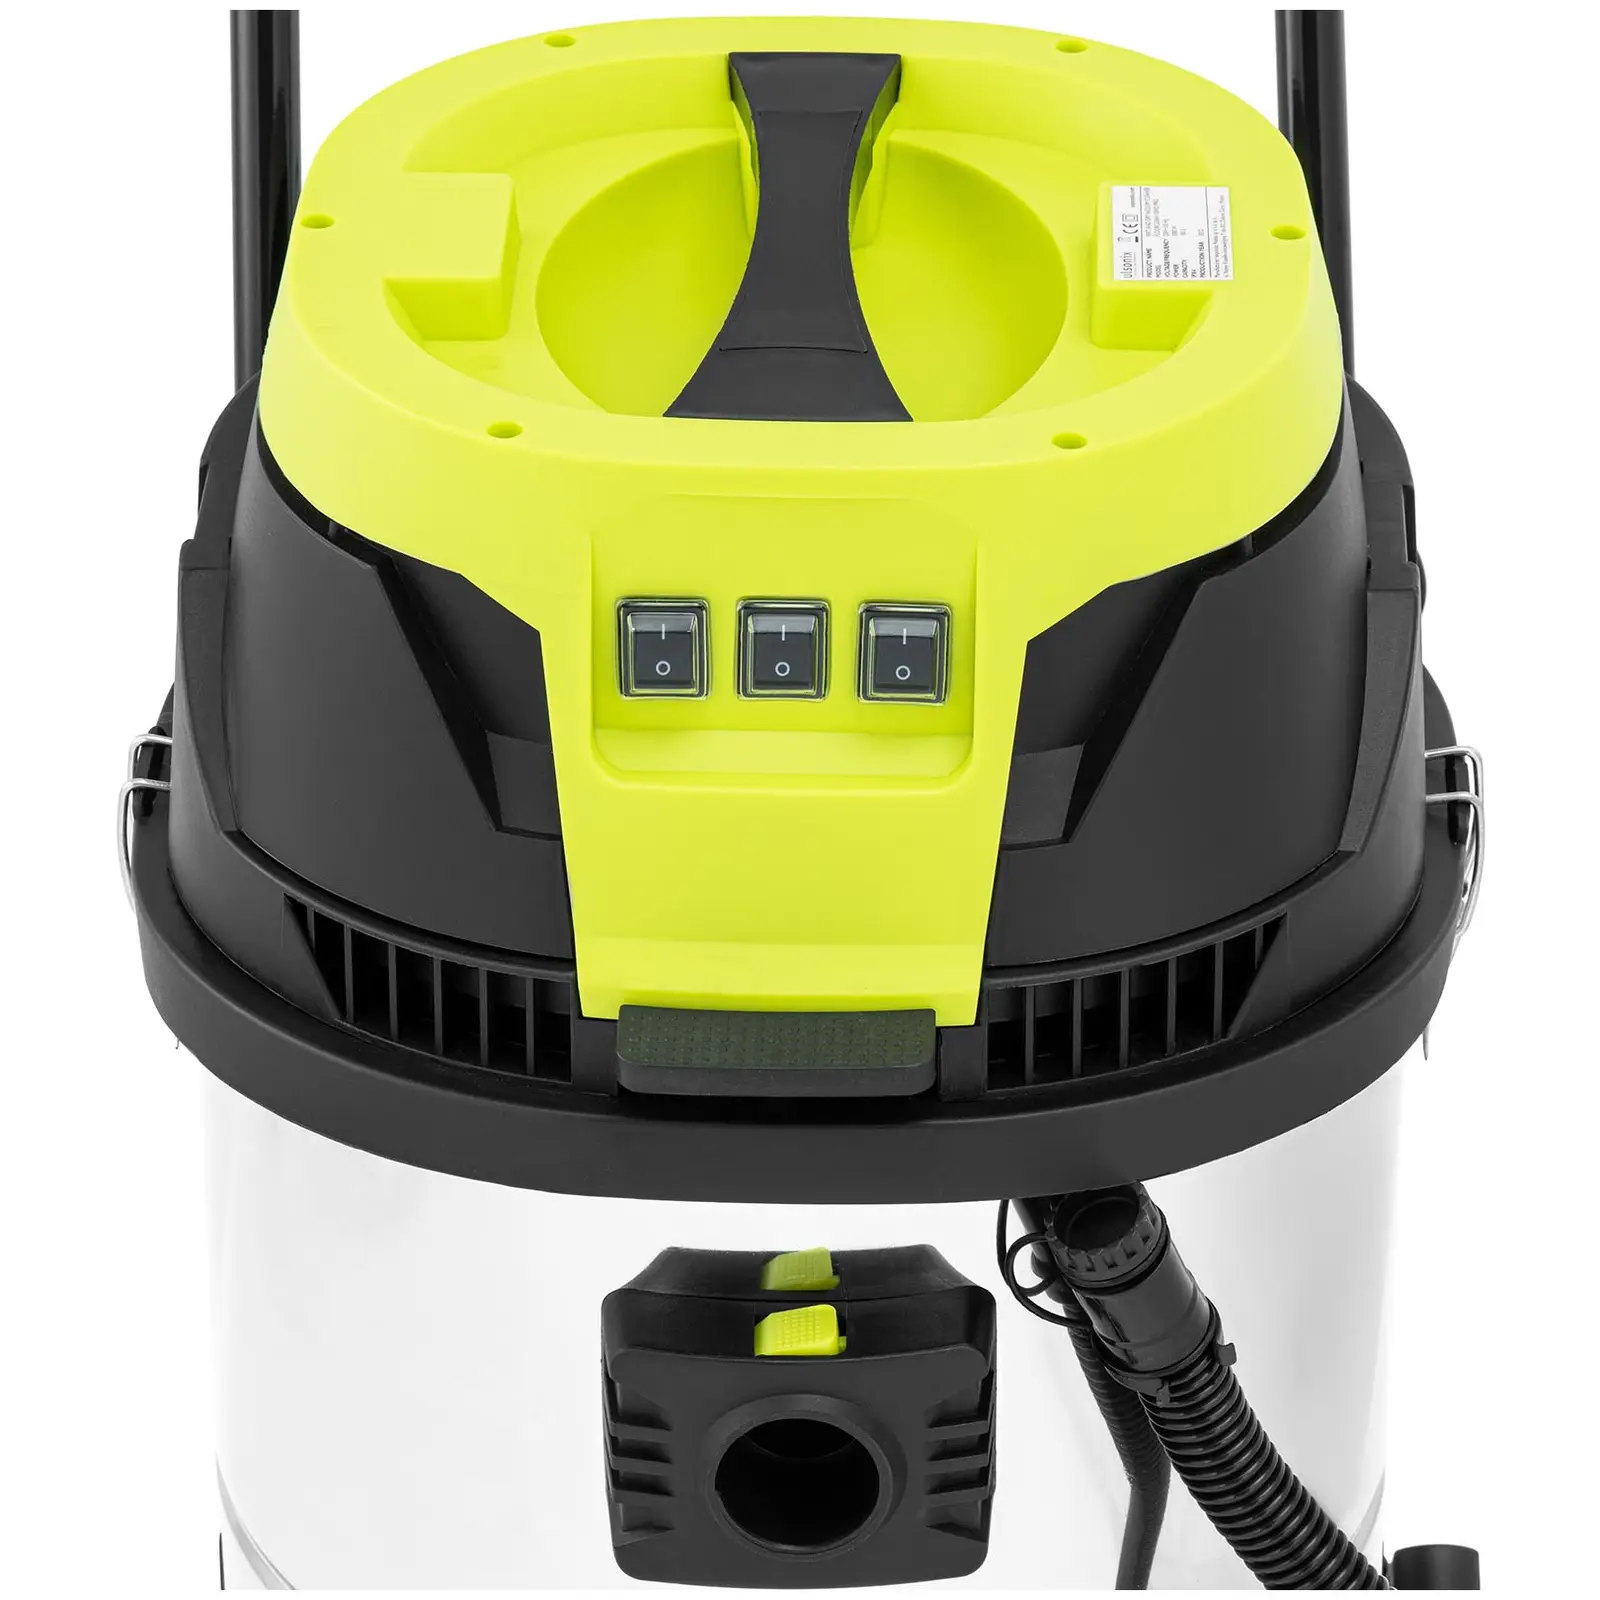 Wet And Dry Vacuum Cleaner - 3000 W - 100 L